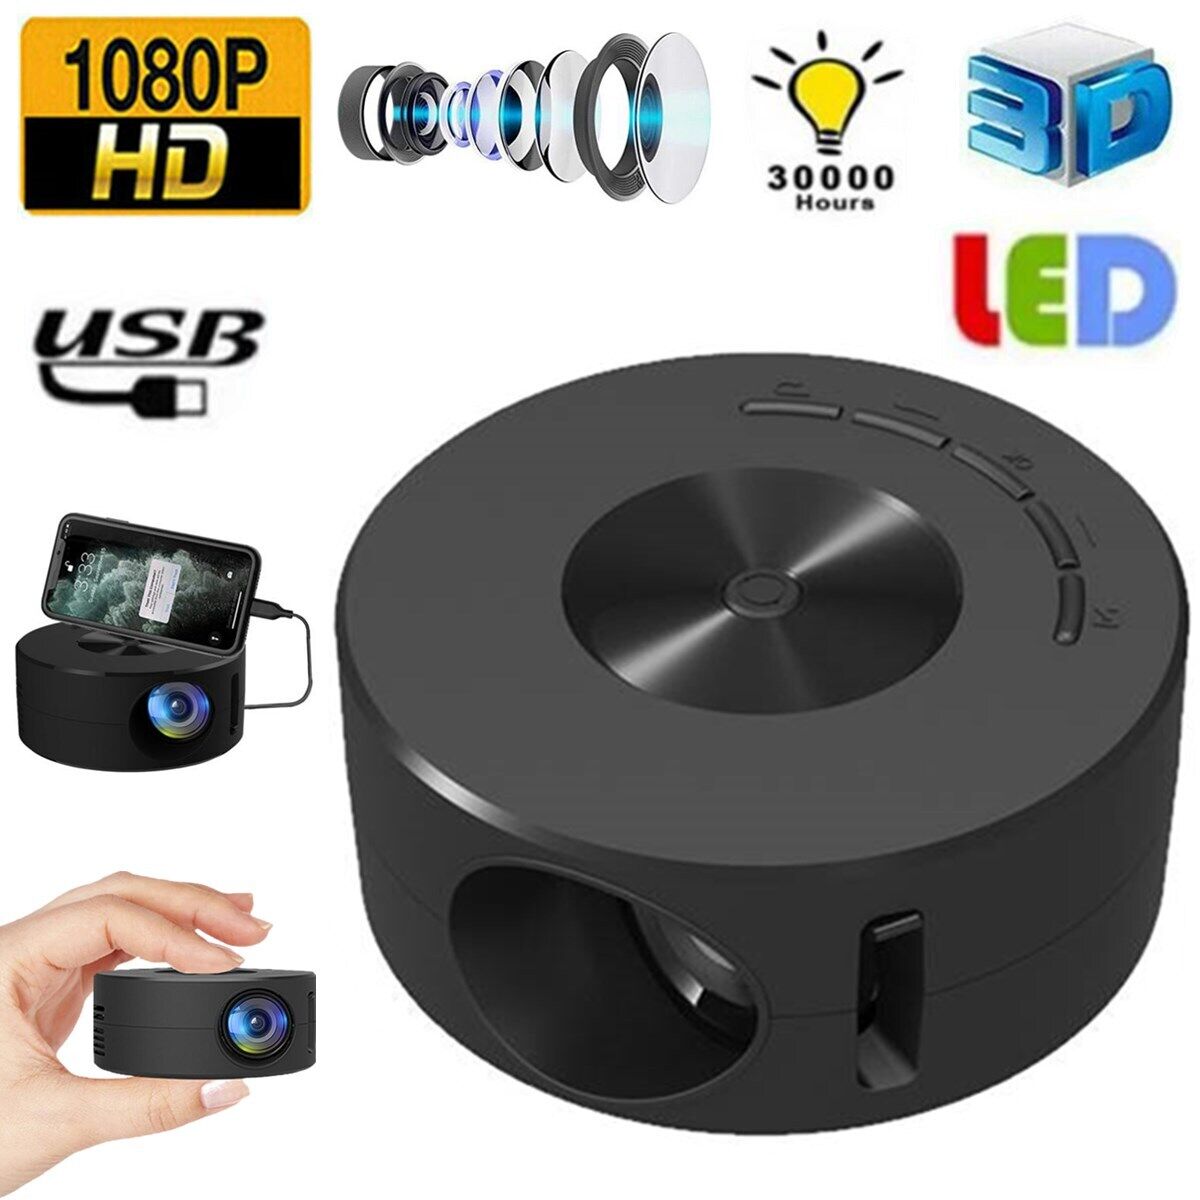 Mini Projector LED HD 1080P Home Cinema Portable Office Theater Movie Projector